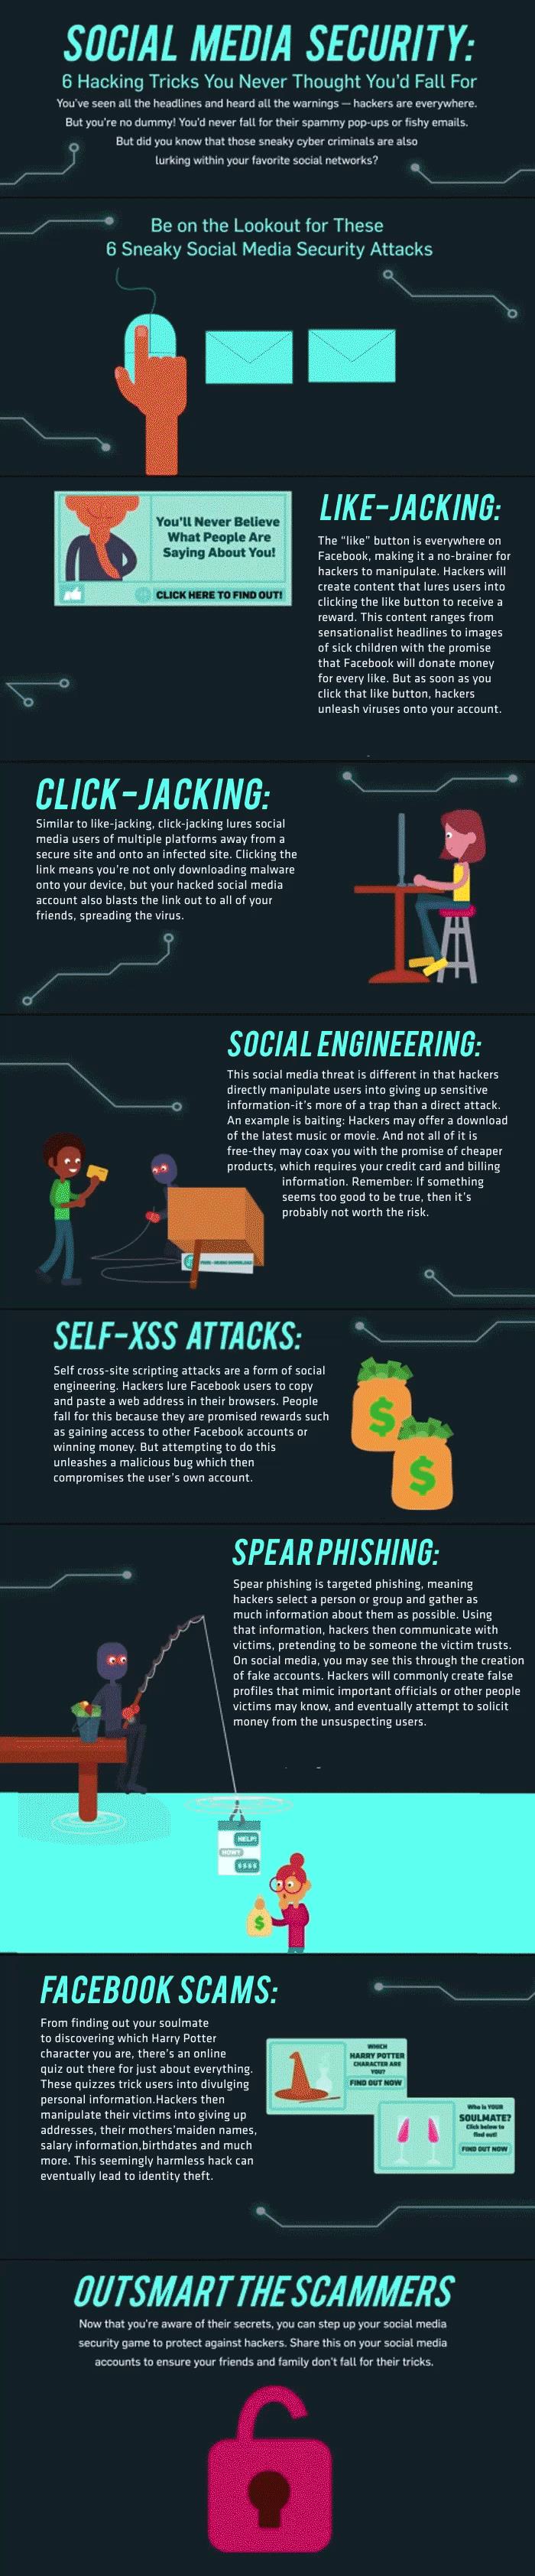 Social Media Security: 6 Hacking Tricks You Never Thought You'd Fall For [Infographic]